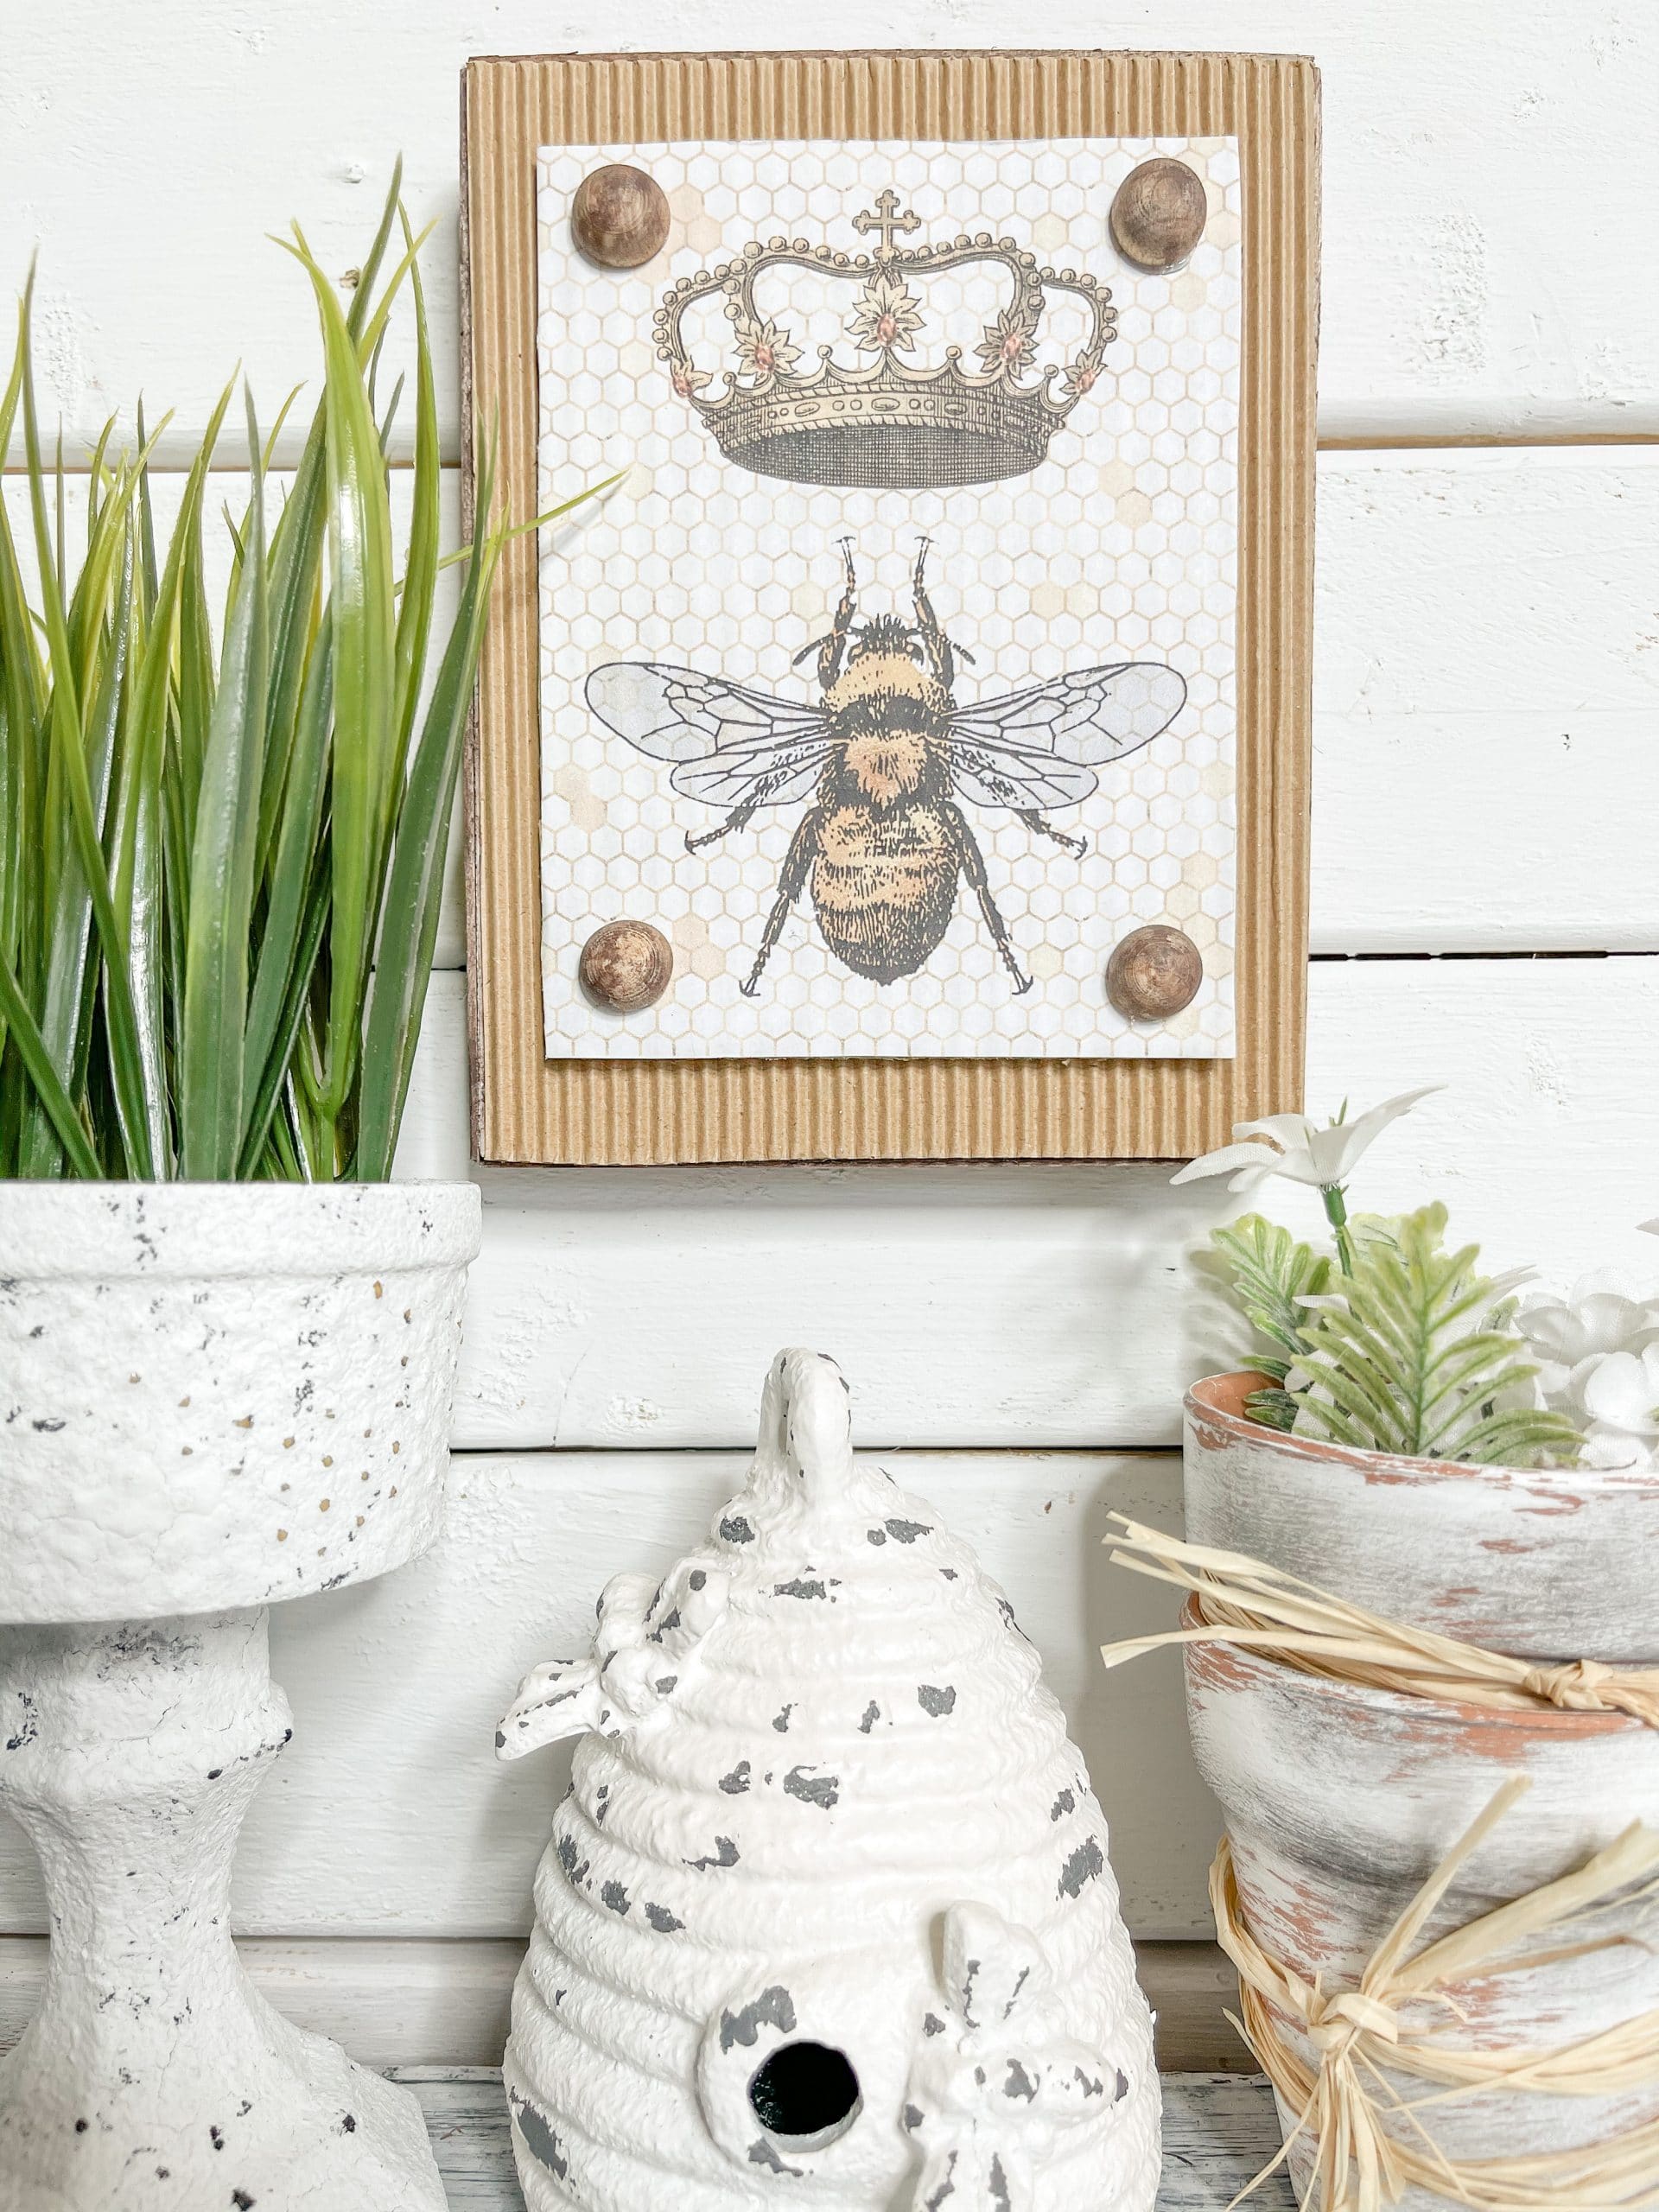 https://www.themakersmap.com/wp-content/uploads/2021/04/diy-home-decor-with-free-vintage-bee-printable-1-scaled.jpg